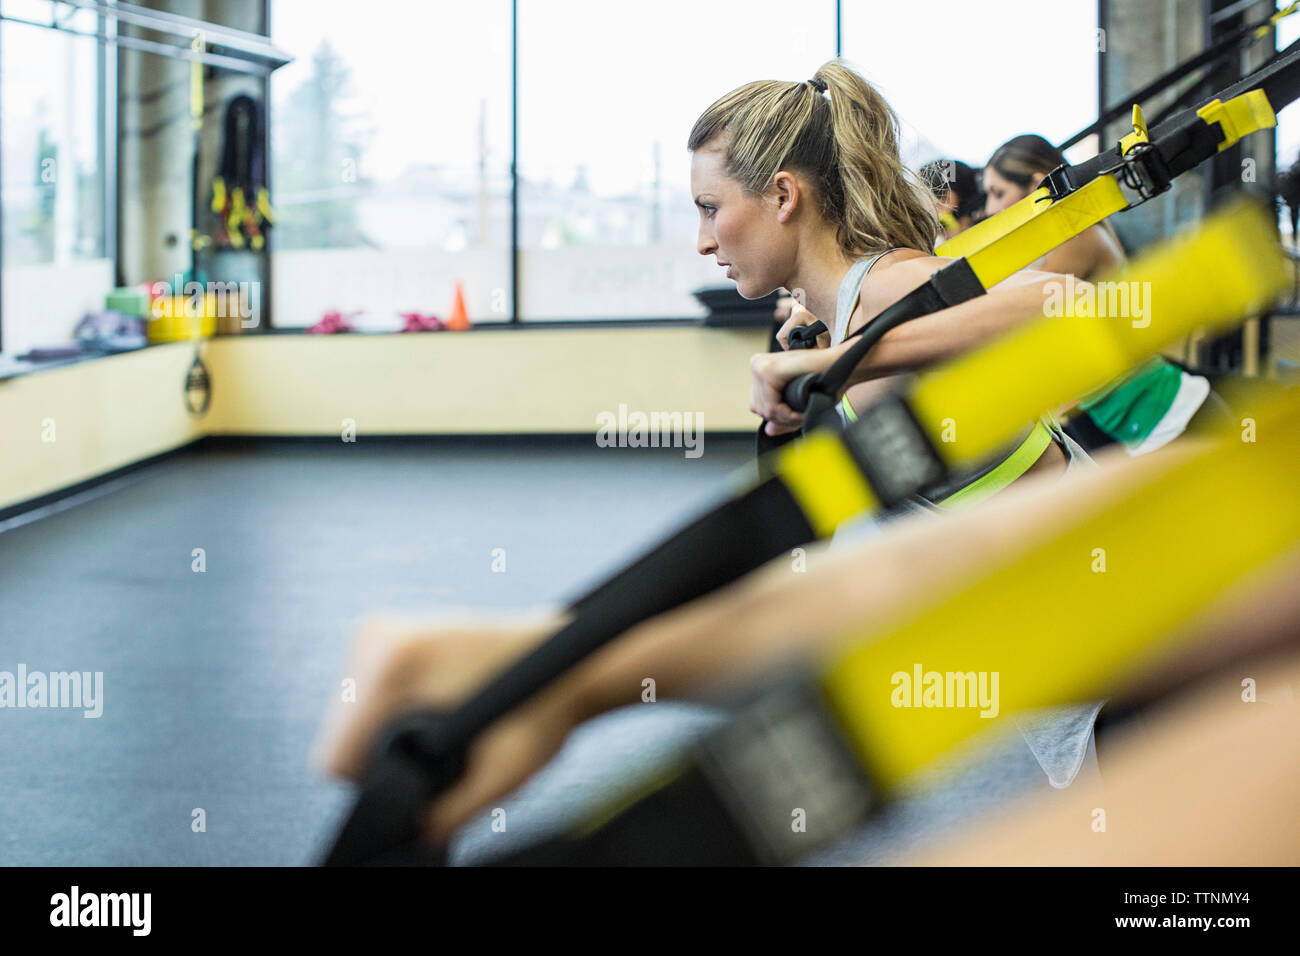 Women pulling resistance bands while exercising in gym Stock Photo